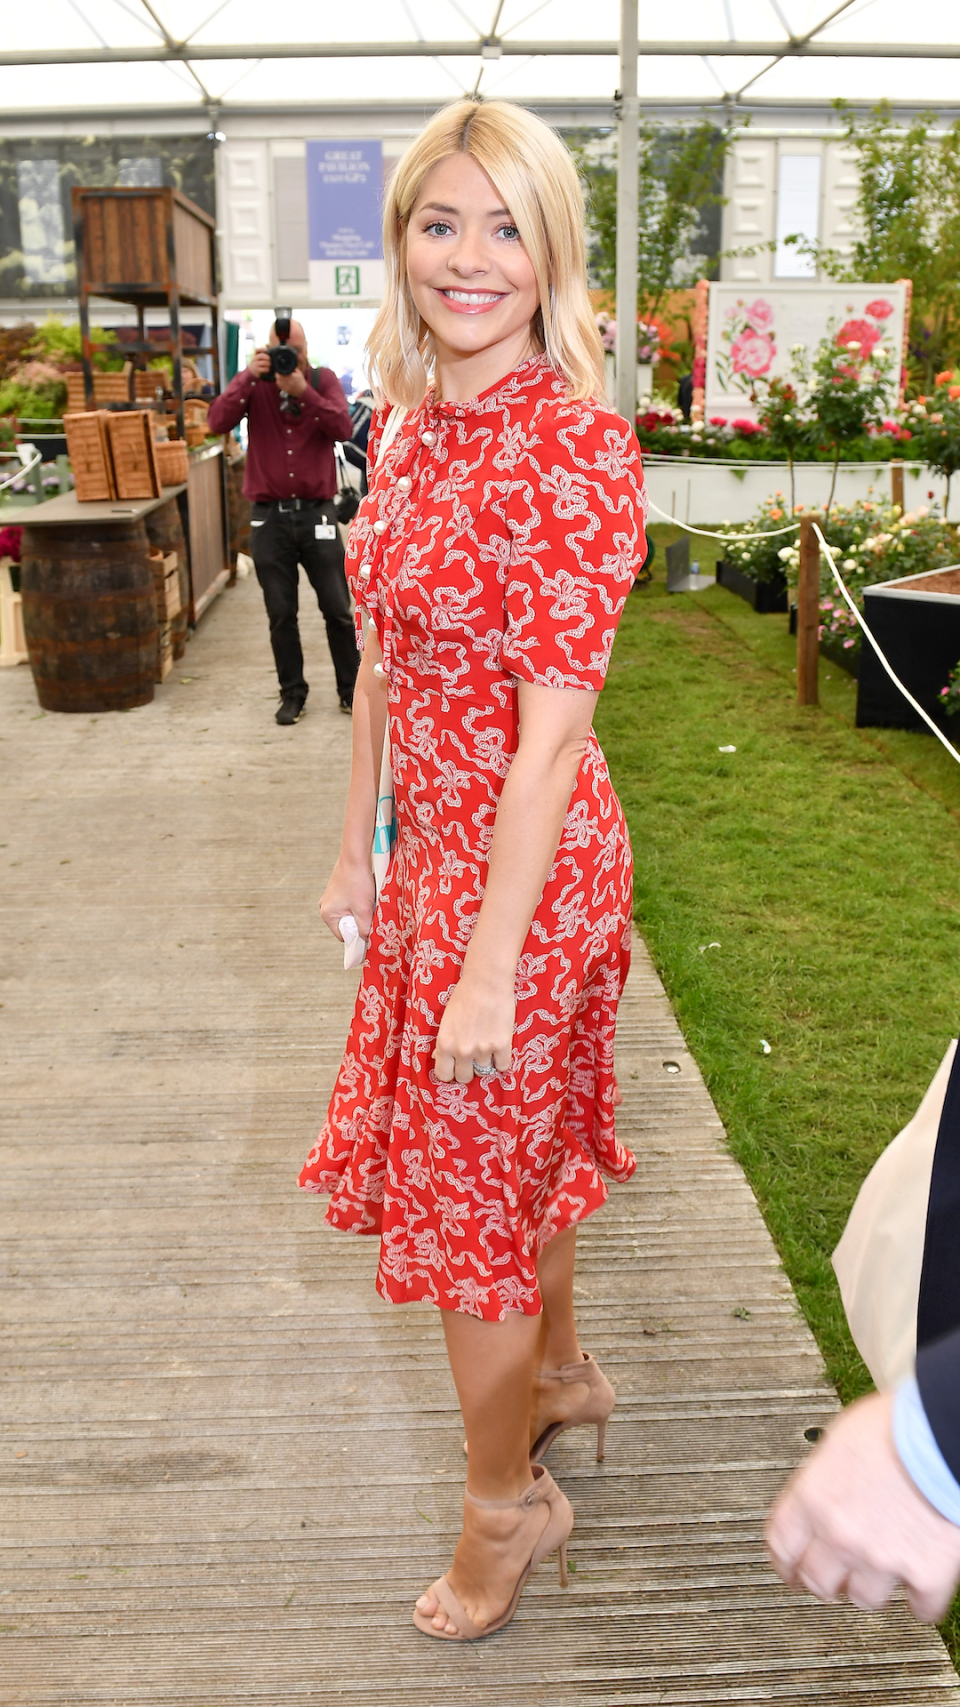 Holly Willoughby attends the Chelsea Flower Show 2018 on May 21, 2018 in London, England